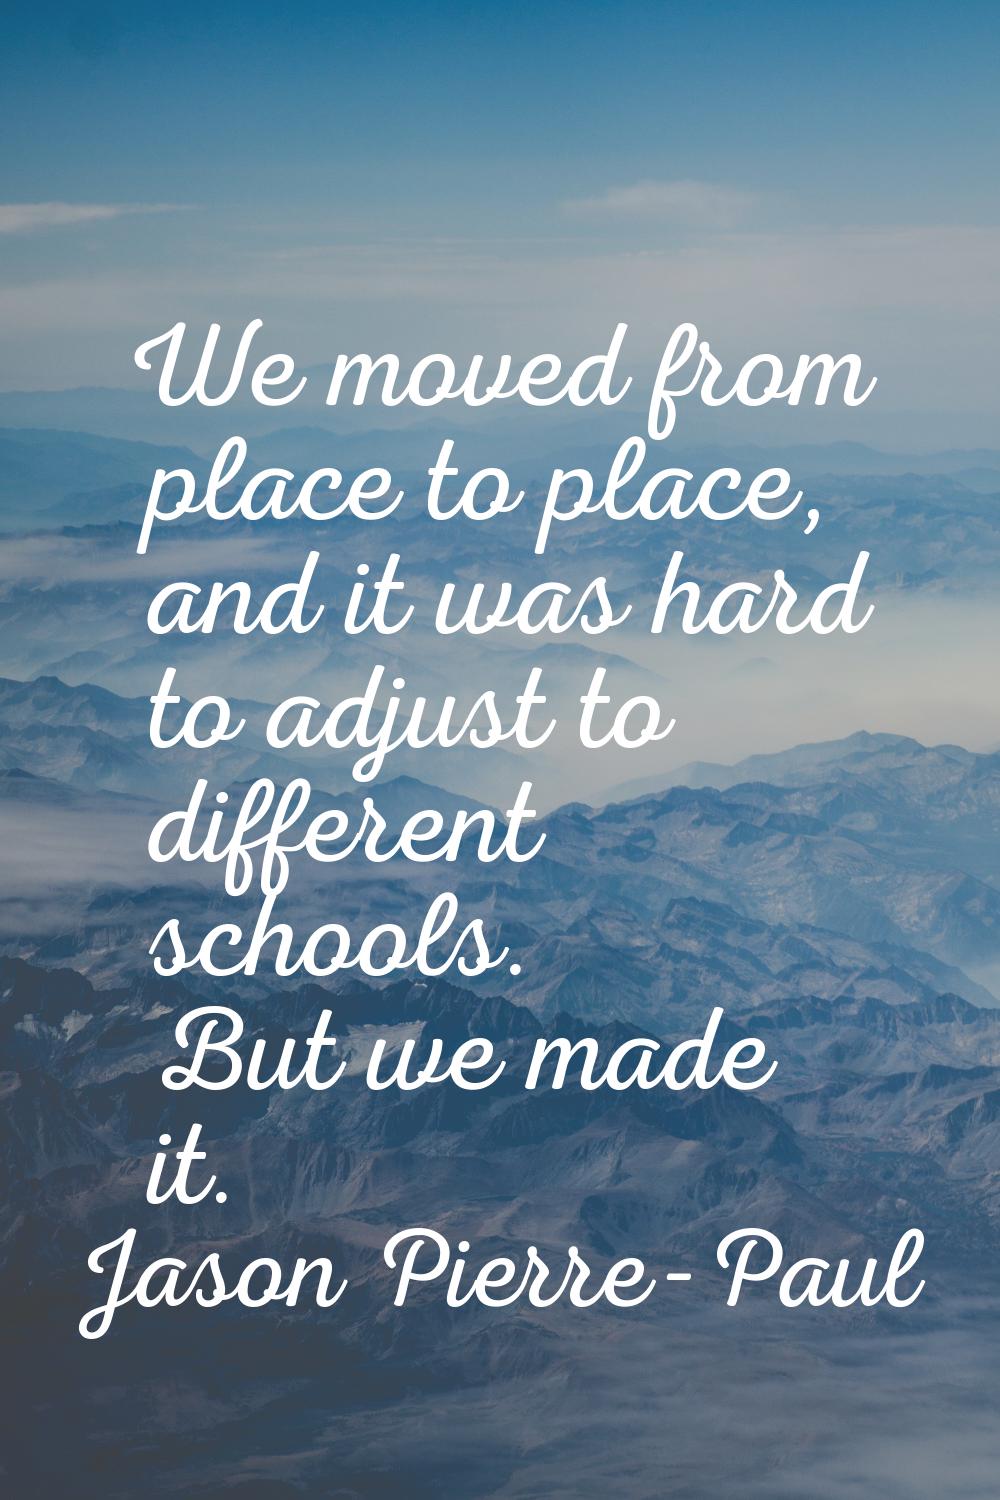 We moved from place to place, and it was hard to adjust to different schools. But we made it.